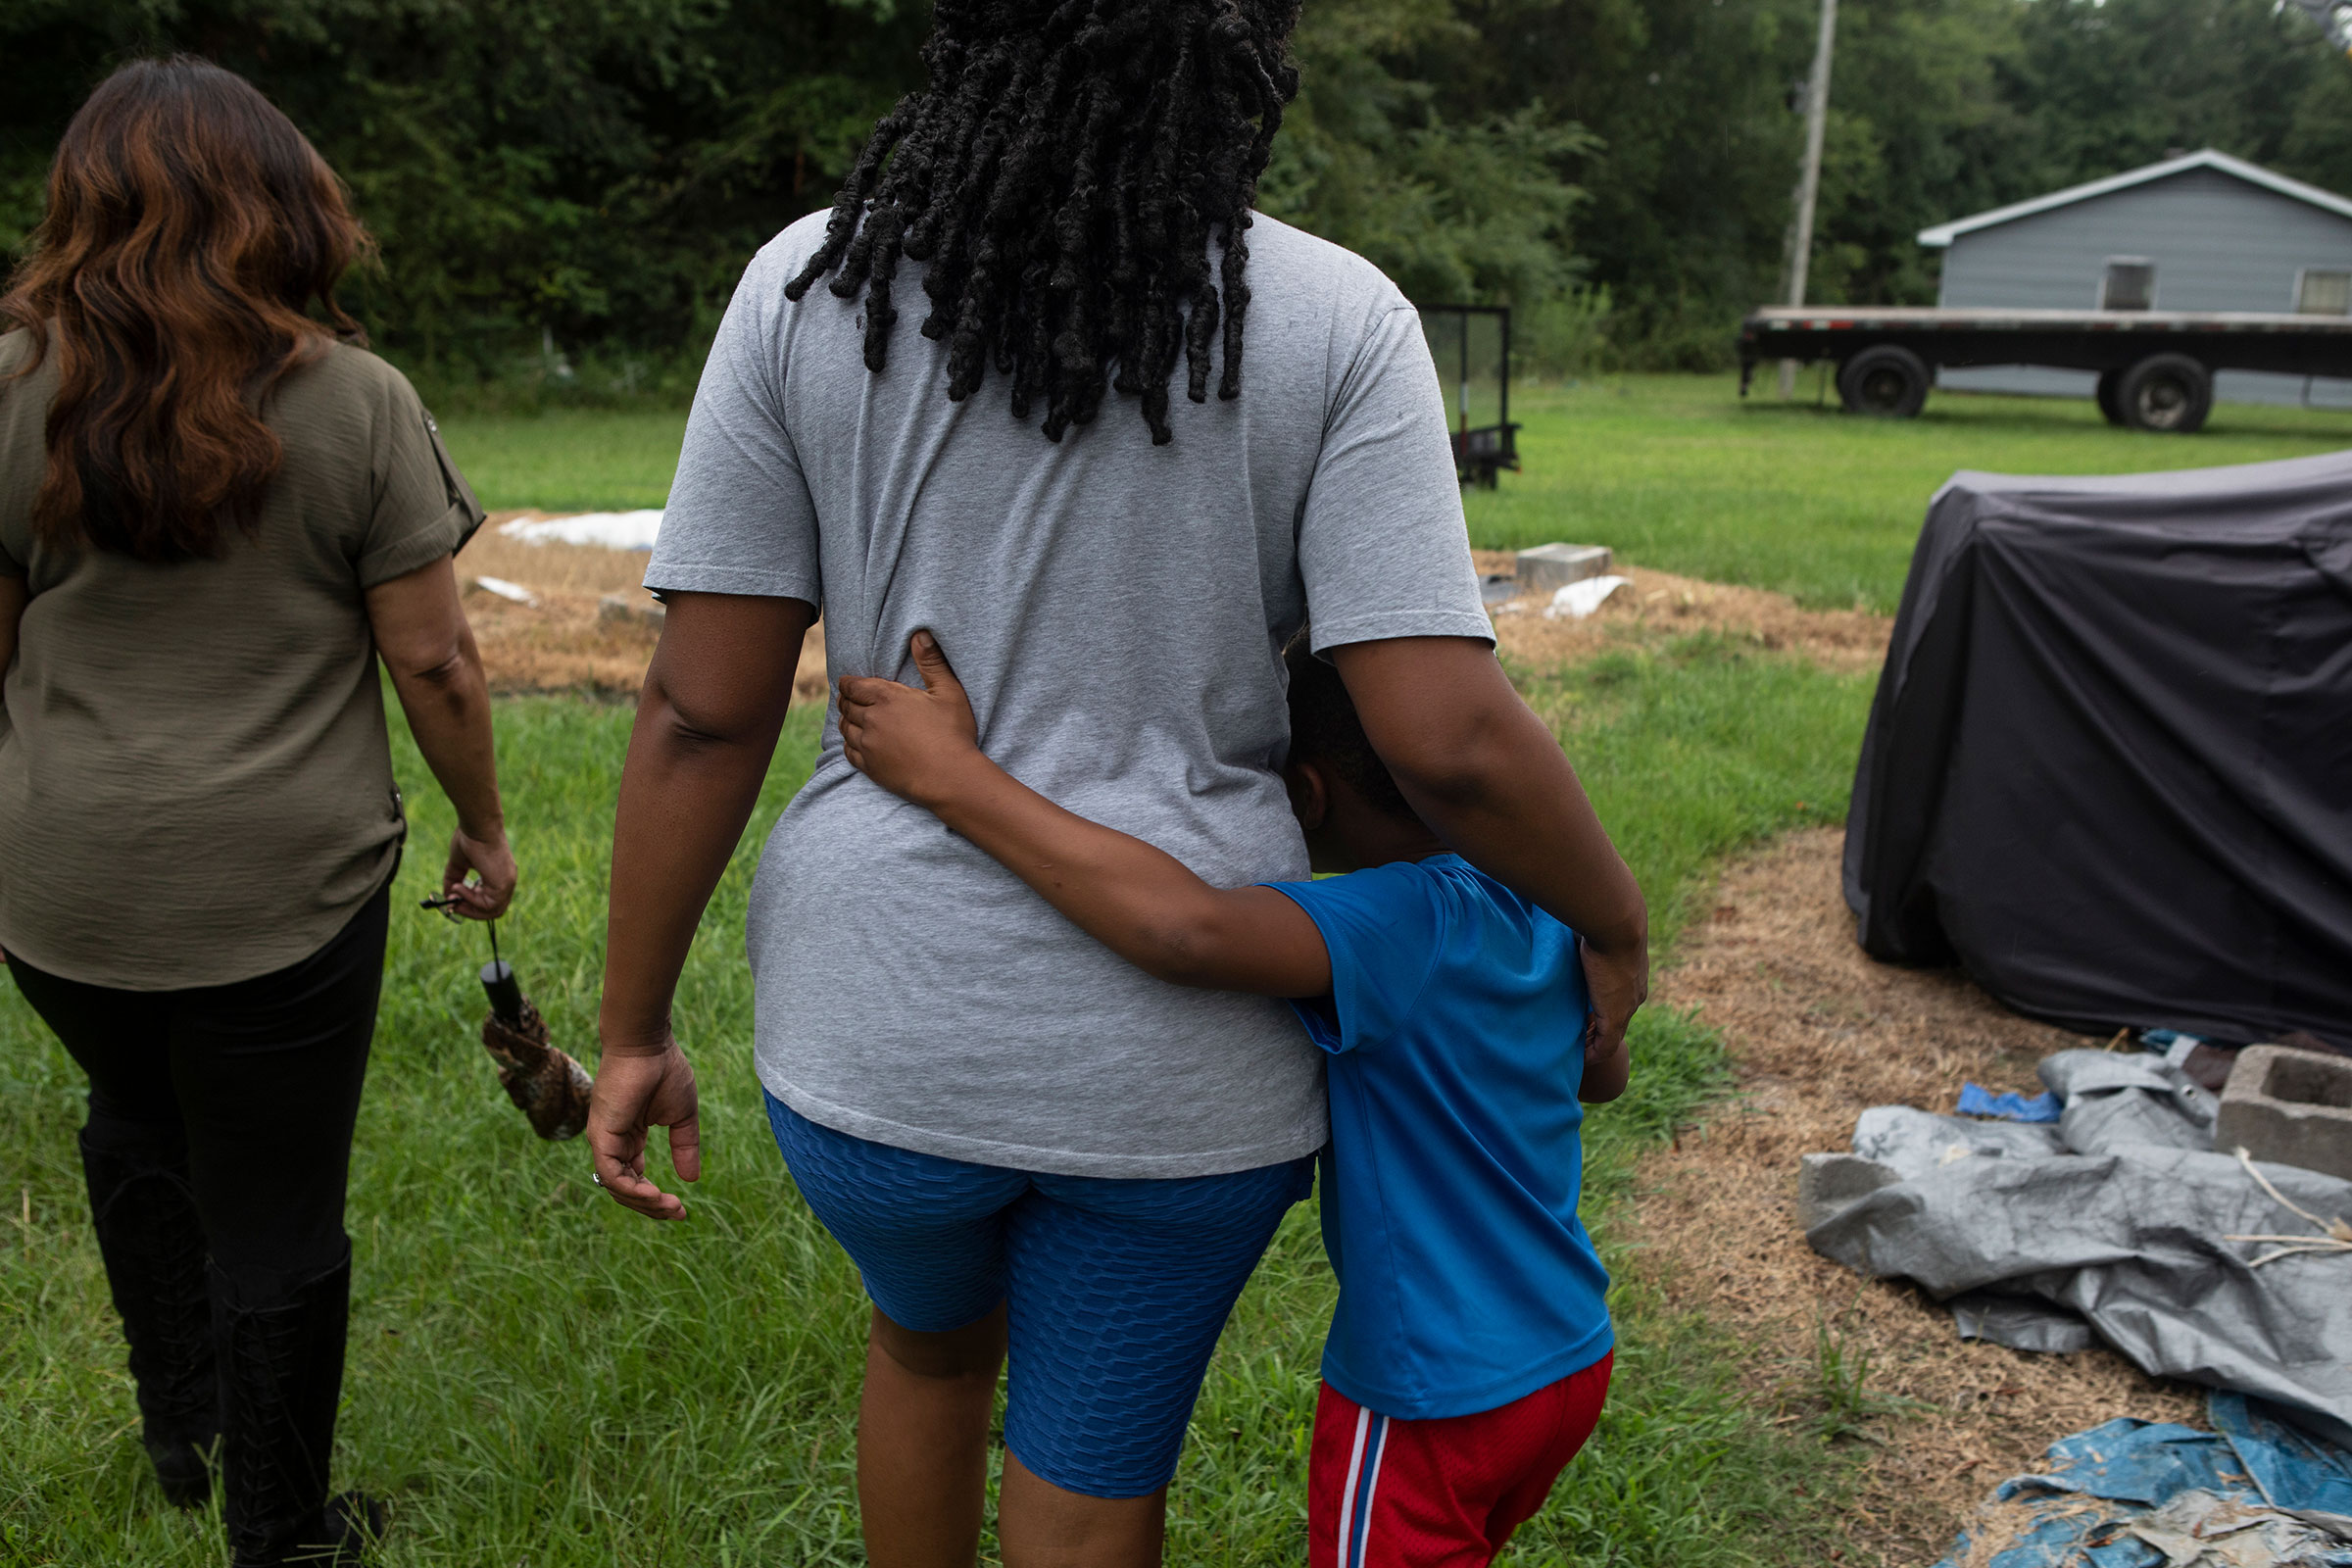 Residents of Lowndes County, who are struggling with sewage problems, walk alongside Catherine Flowers. (Charity Rachelle for TIME)